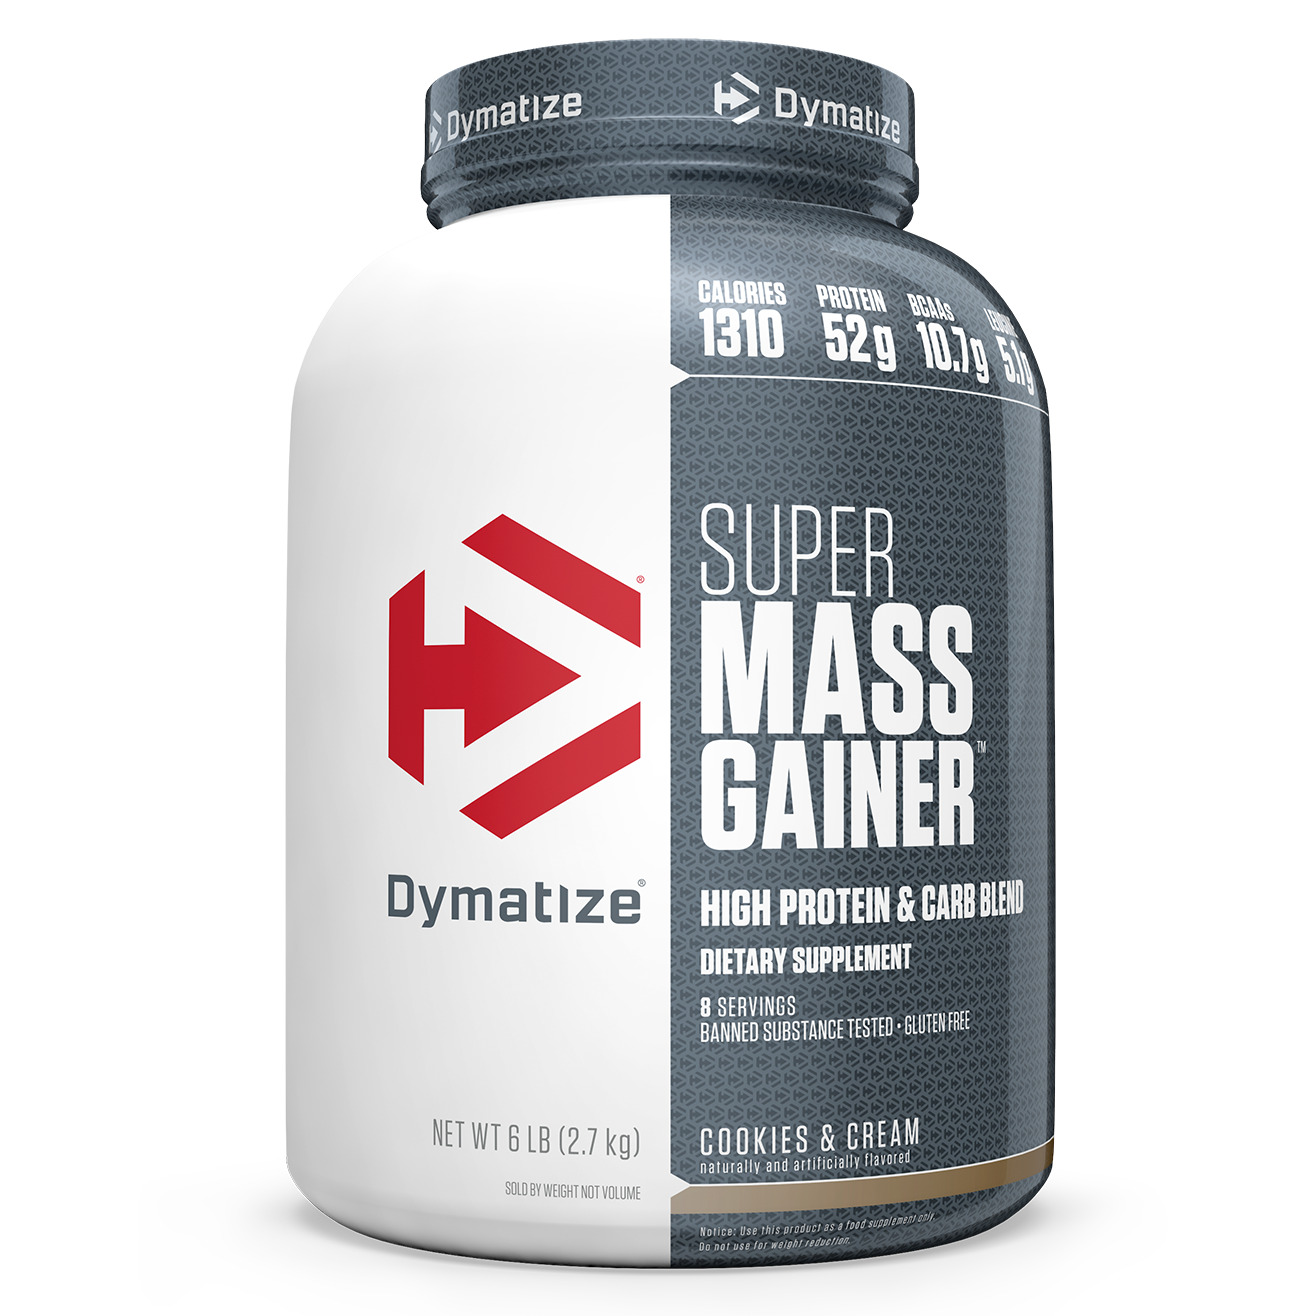 Dymatize Super Mass Gainer Protein Powder, 1280 Calories & 52g Protein, 10.7g BCAAs, Mixes Easily, Tastes Delicious, Rich Chocolate, 6 lbs